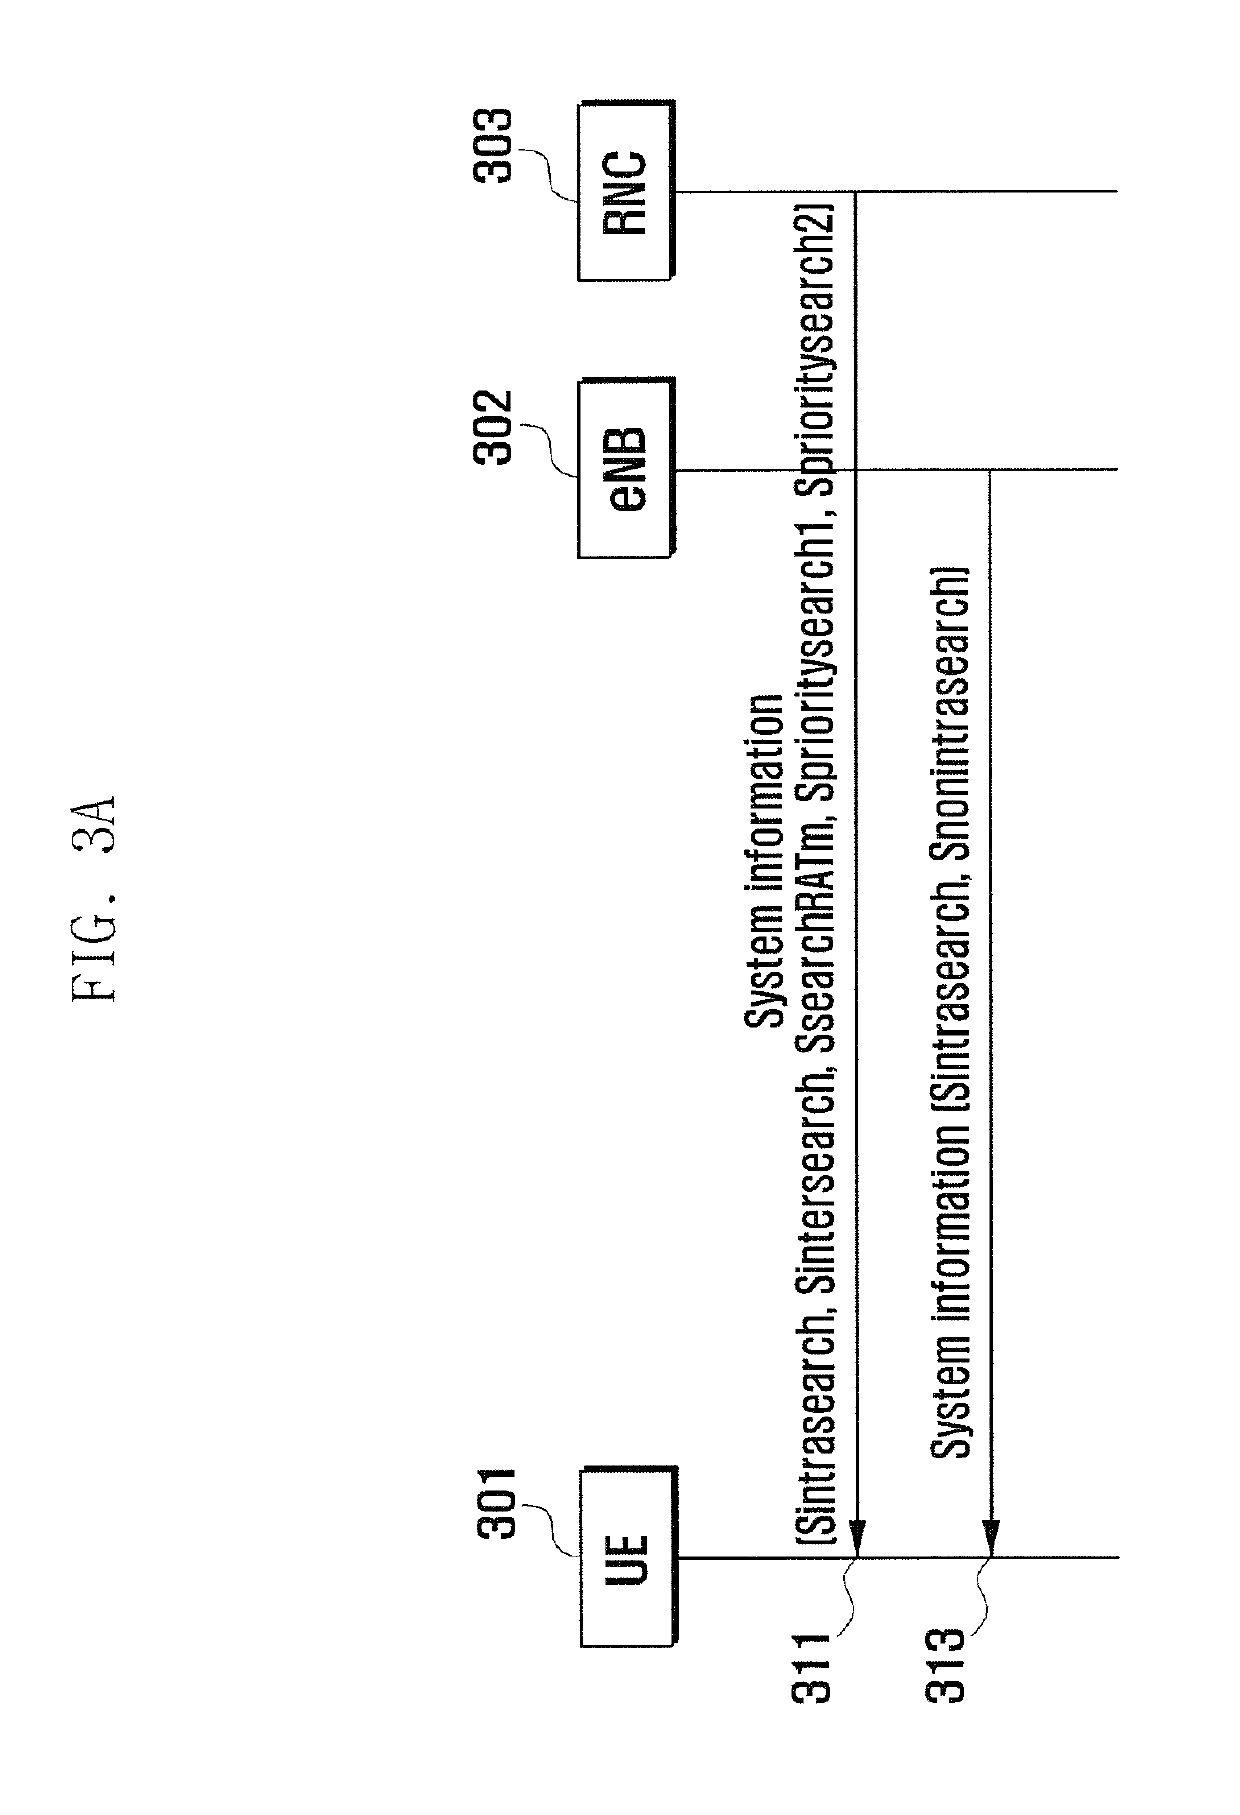 Measurement apparatus and method for the communication of an idle mode device having low mobility in a mobile communication system